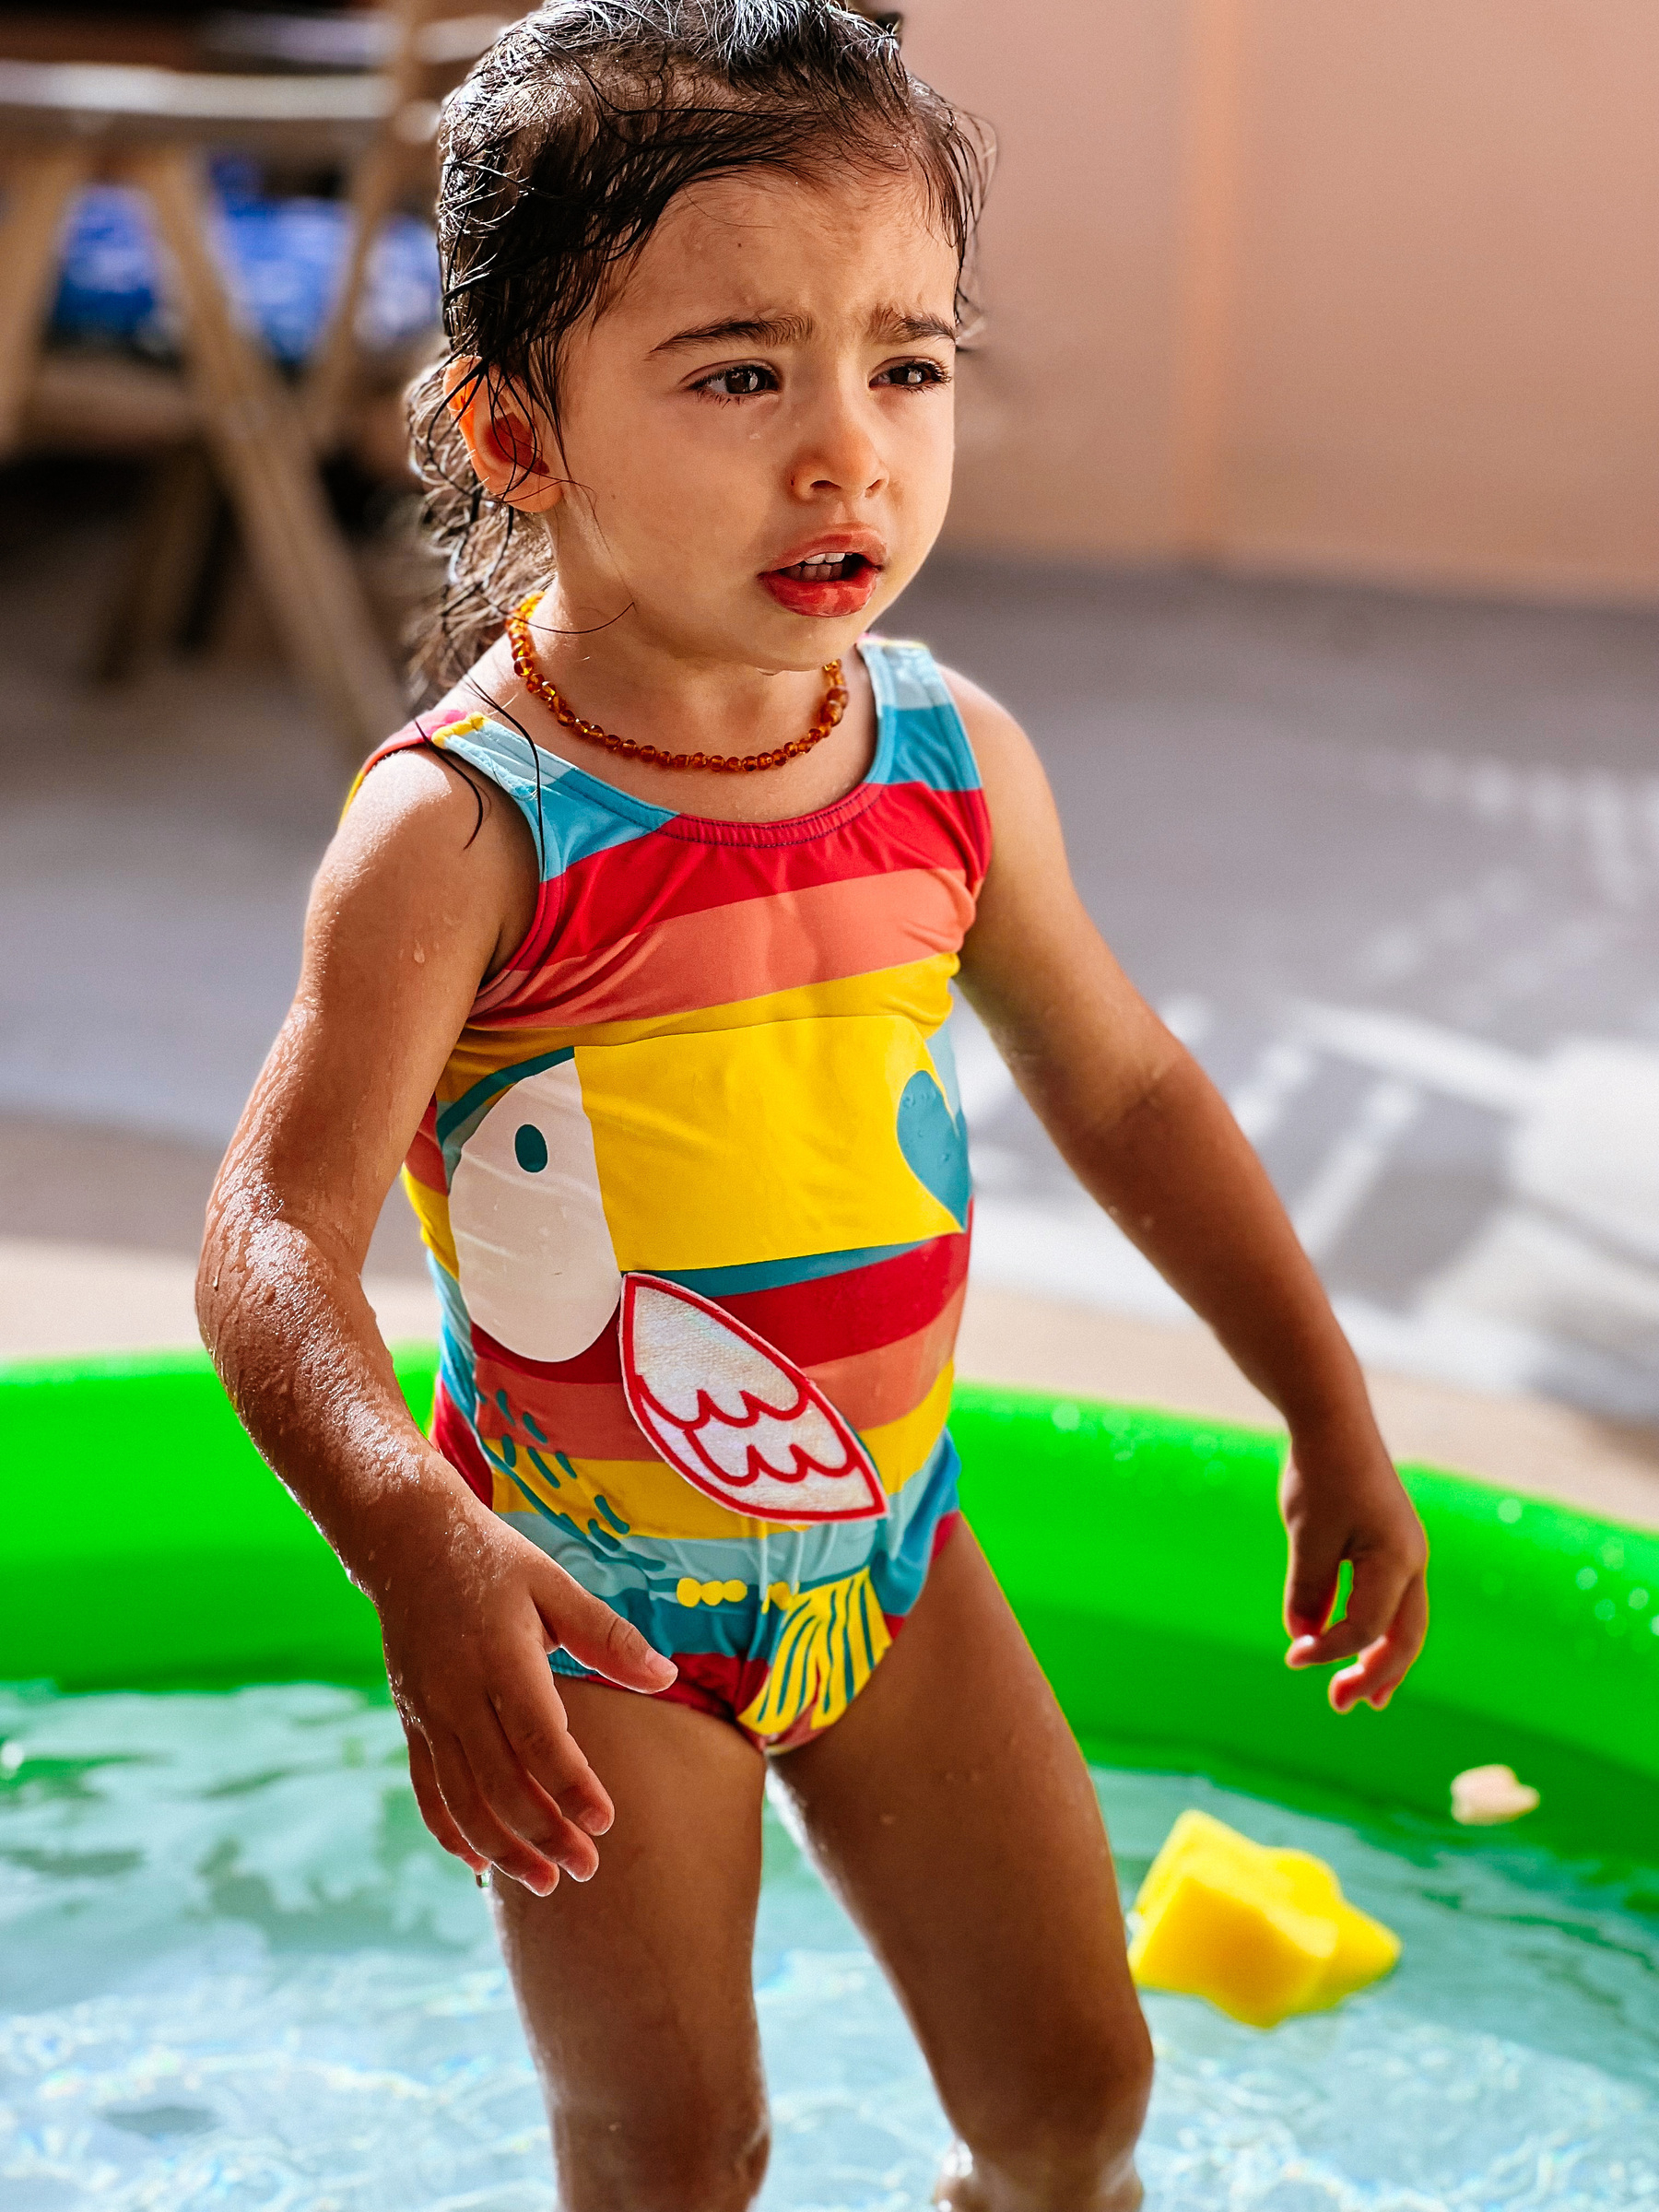 Toddler in inflatable pool. 